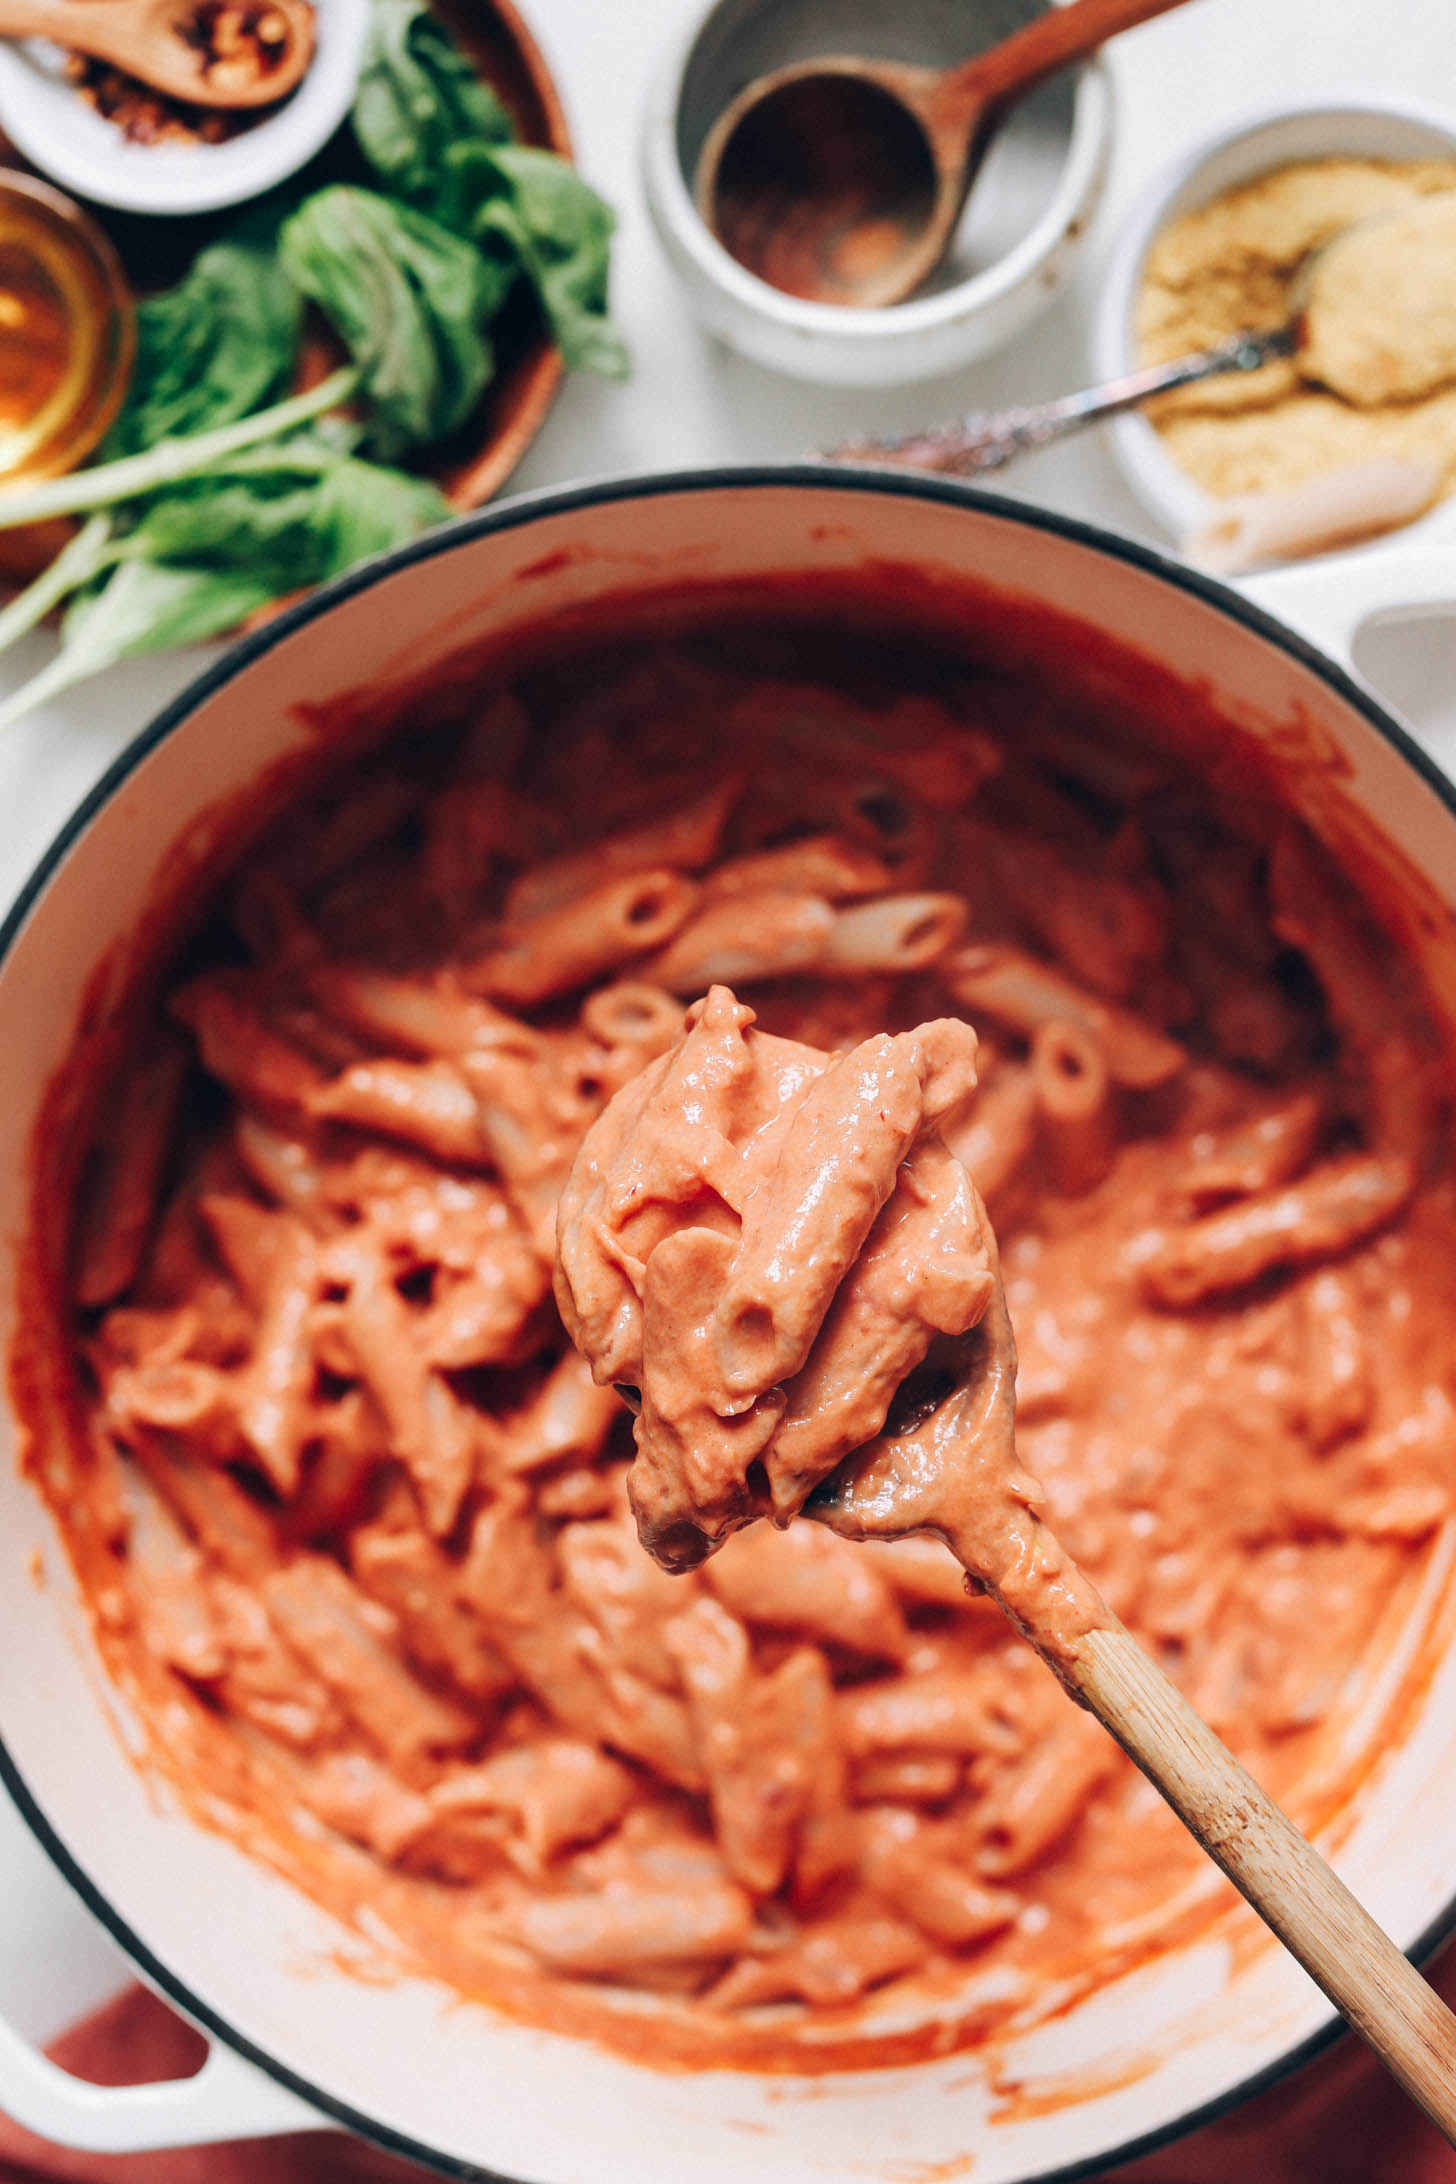 Holding a spoonful of vegan pink penne pasta above a Dutch oven with more pasta